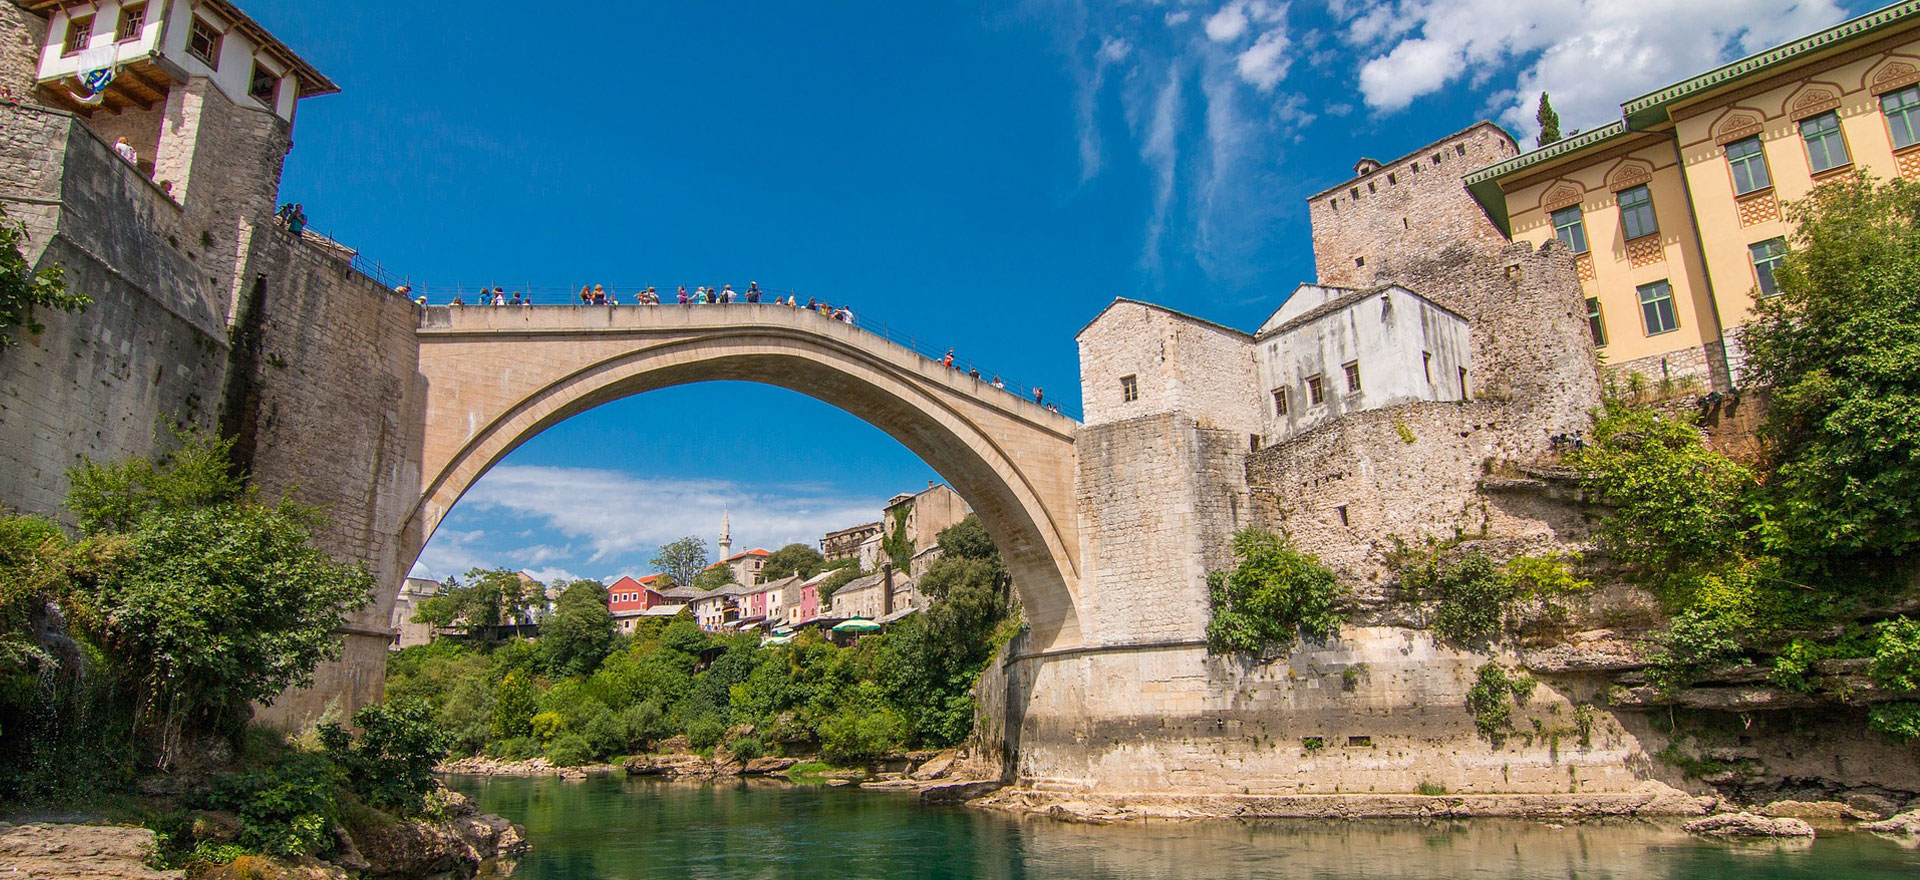 Historic bridge in Mostar - Bosnia holidays and tours